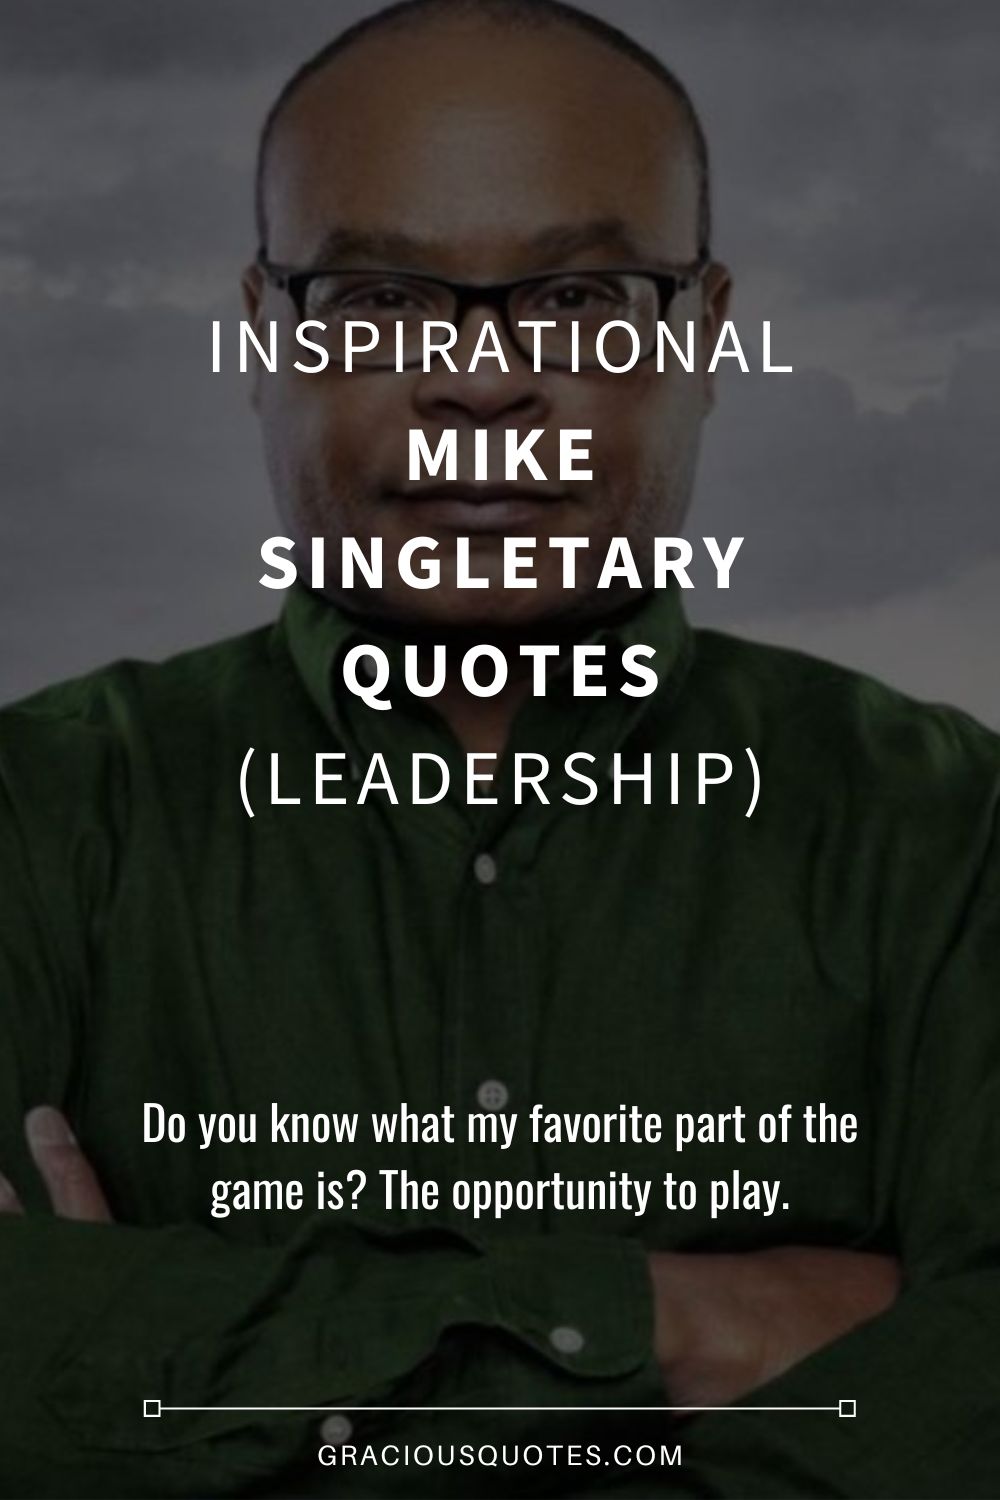 Inspirational Mike Singletary Quotes (LEADERSHIP) - Gracious Quotes